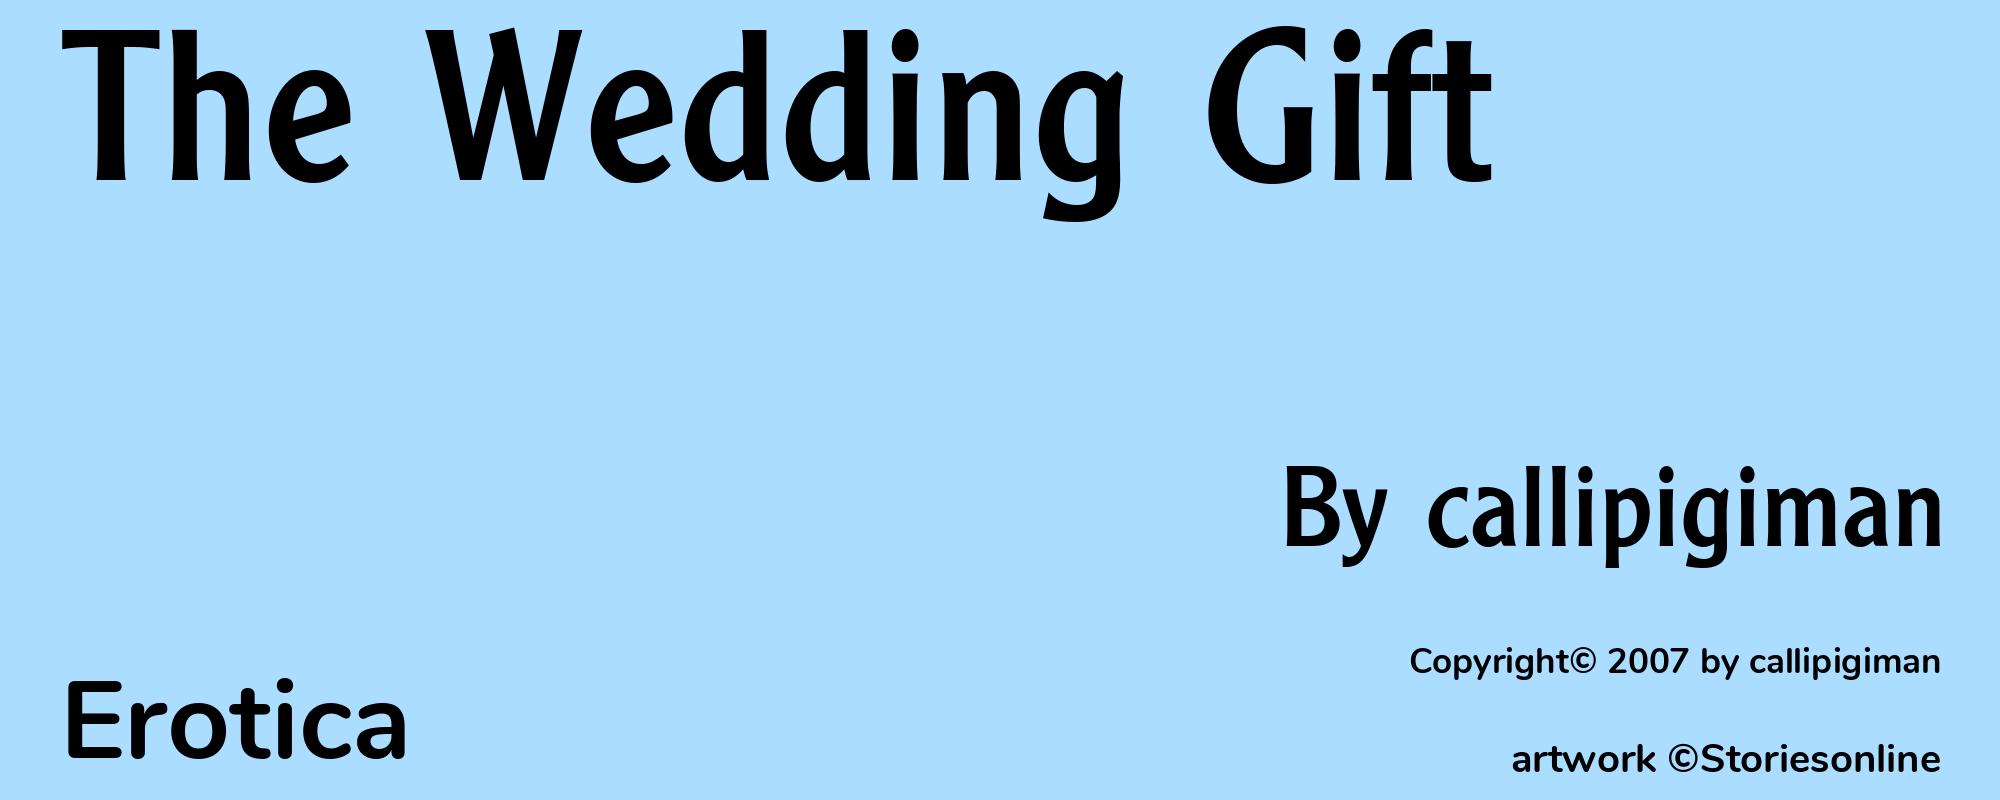 The Wedding Gift - Cover